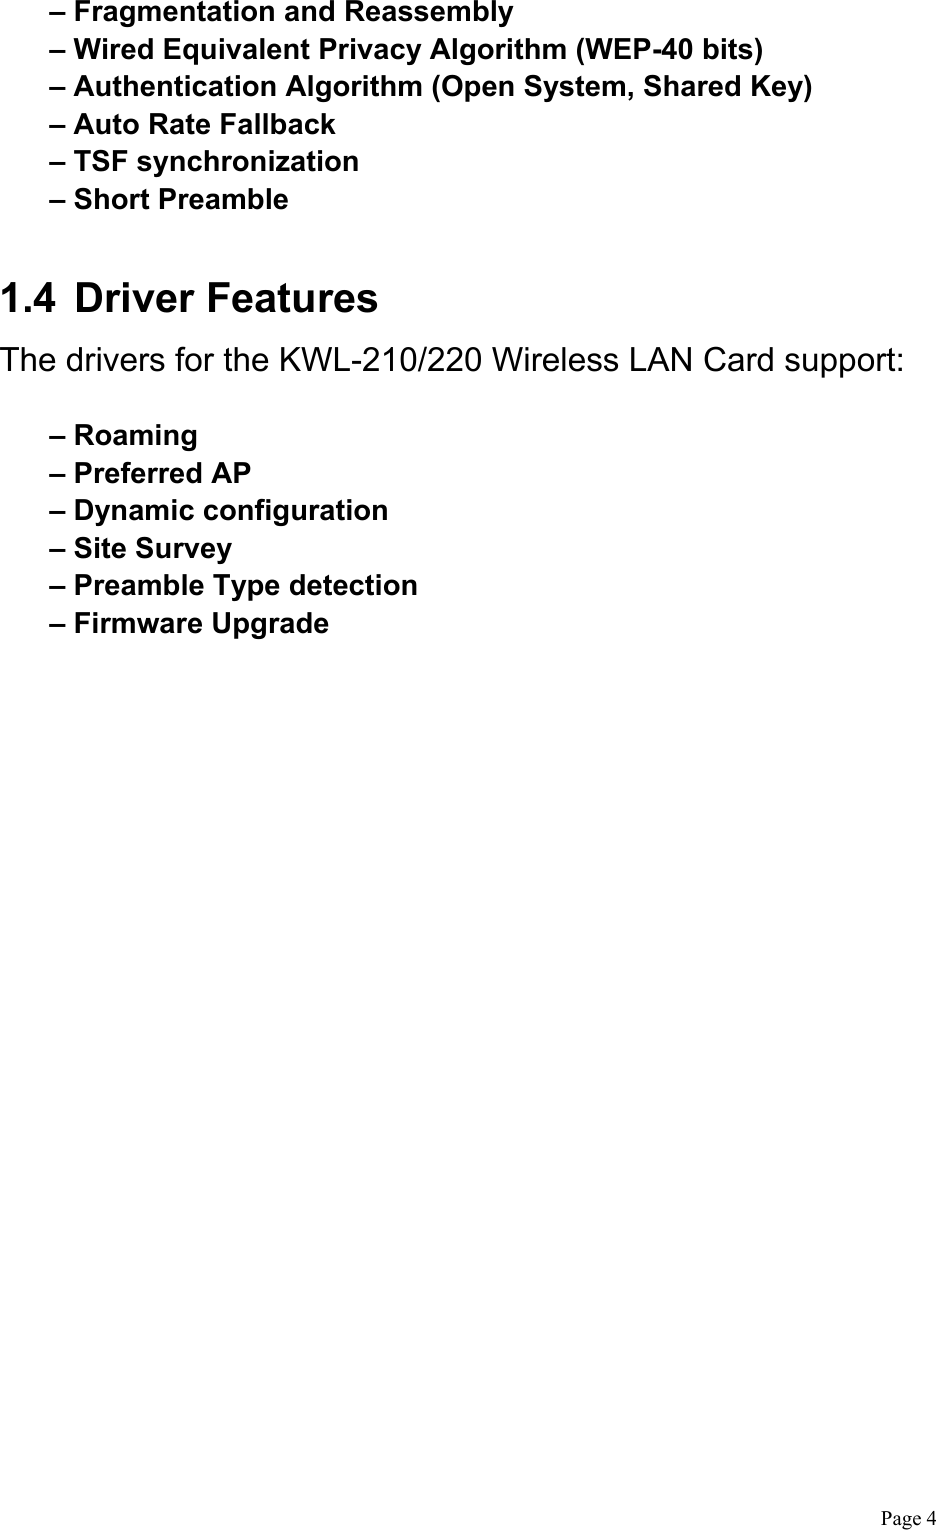  Page 4 – Fragmentation and Reassembly – Wired Equivalent Privacy Algorithm (WEP-40 bits) – Authentication Algorithm (Open System, Shared Key) – Auto Rate Fallback – TSF synchronization – Short Preamble  1.4 Driver Features The drivers for the KWL-210/220 Wireless LAN Card support:  – Roaming – Preferred AP – Dynamic configuration – Site Survey – Preamble Type detection – Firmware Upgrade 